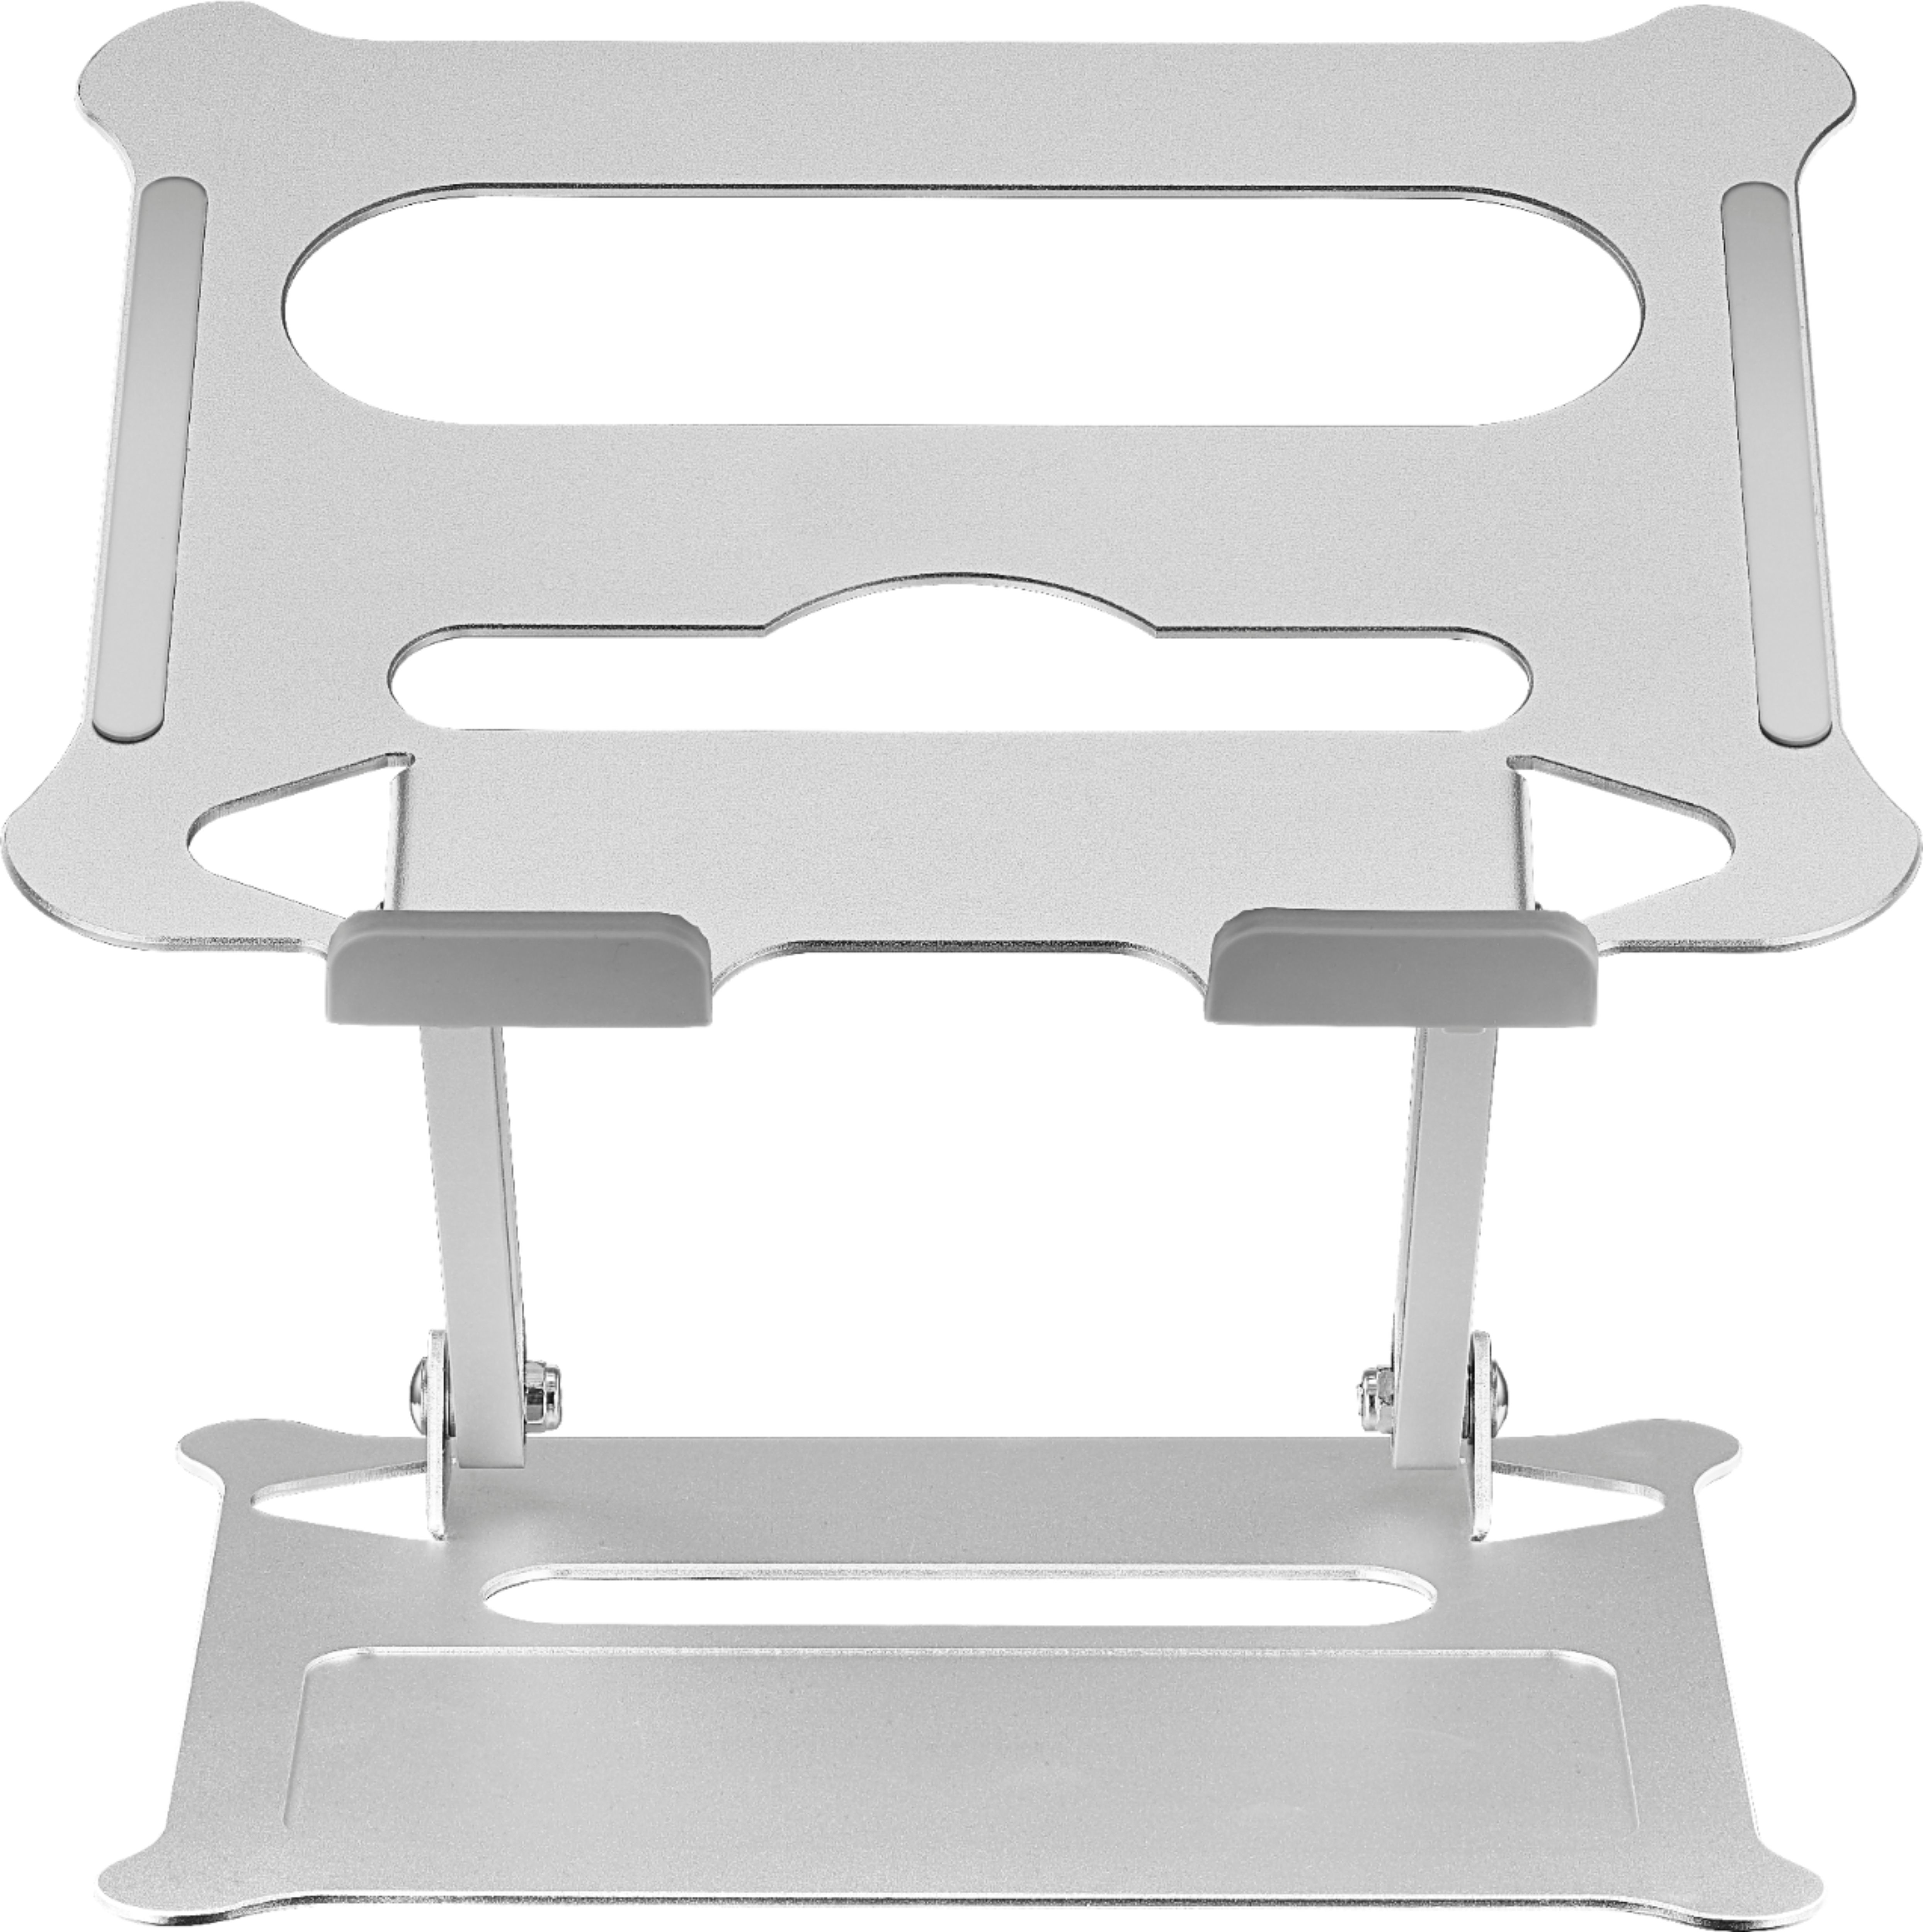 Insignia™ Ergonomic Laptop Stand with Adjustable Height and Angle